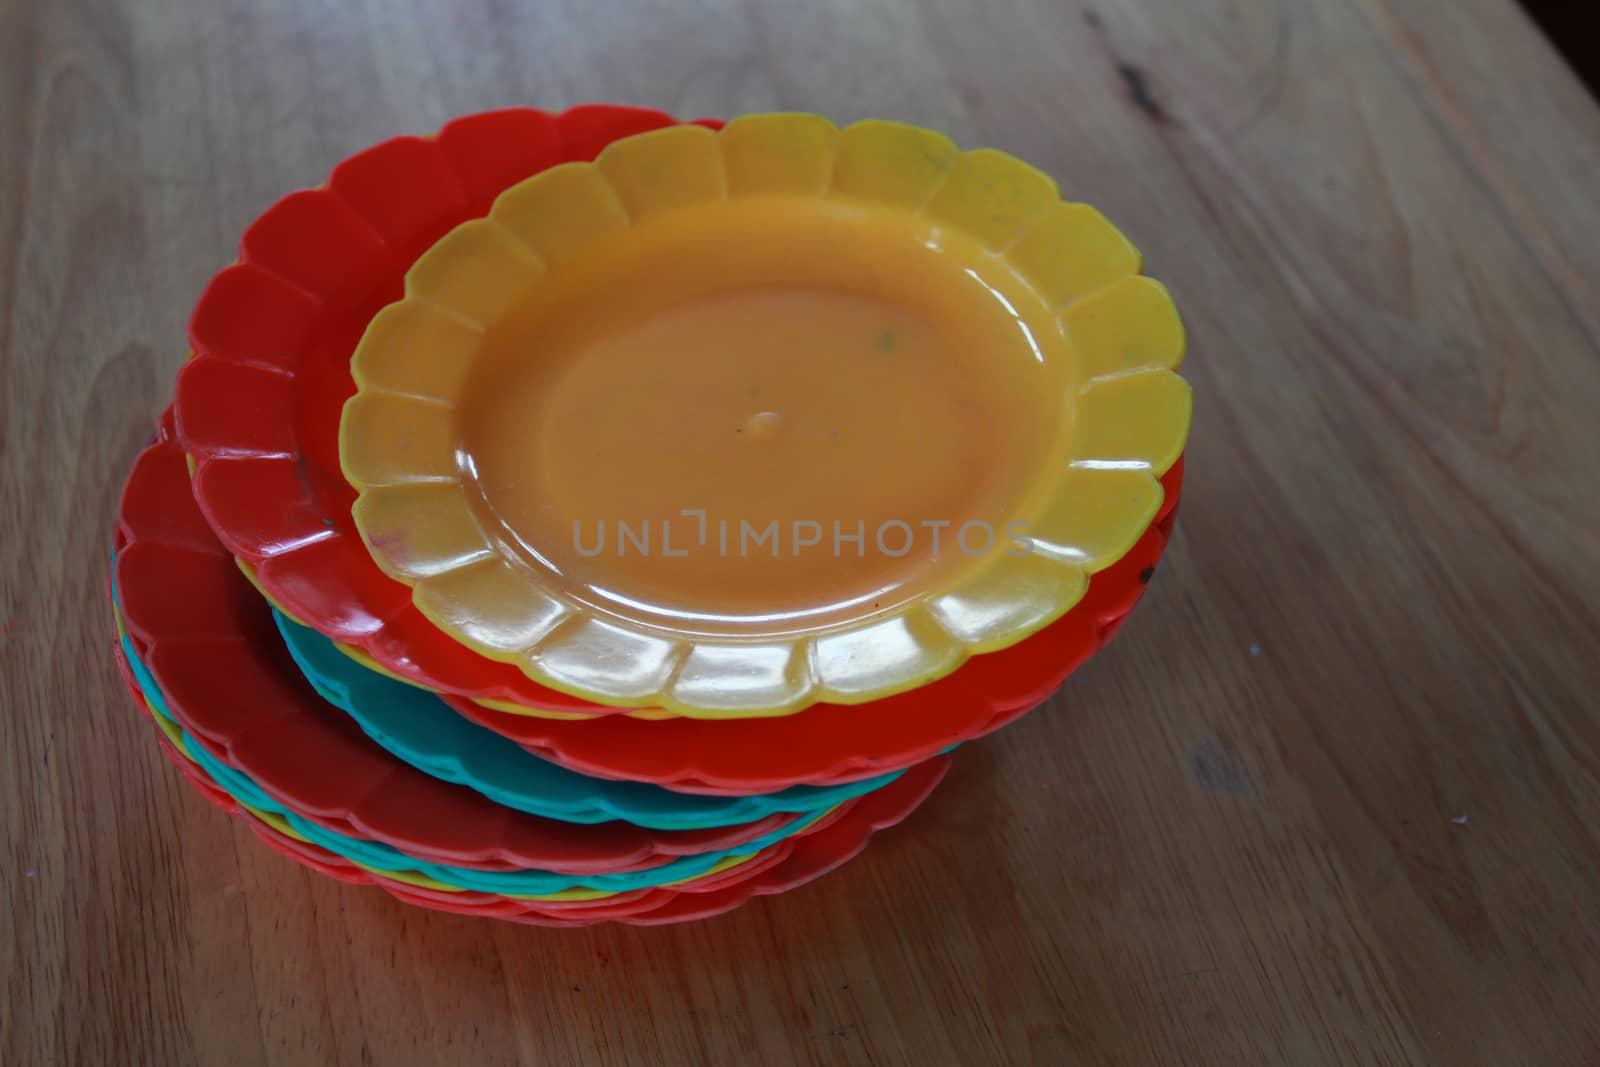 plastic dishes by kaidevil